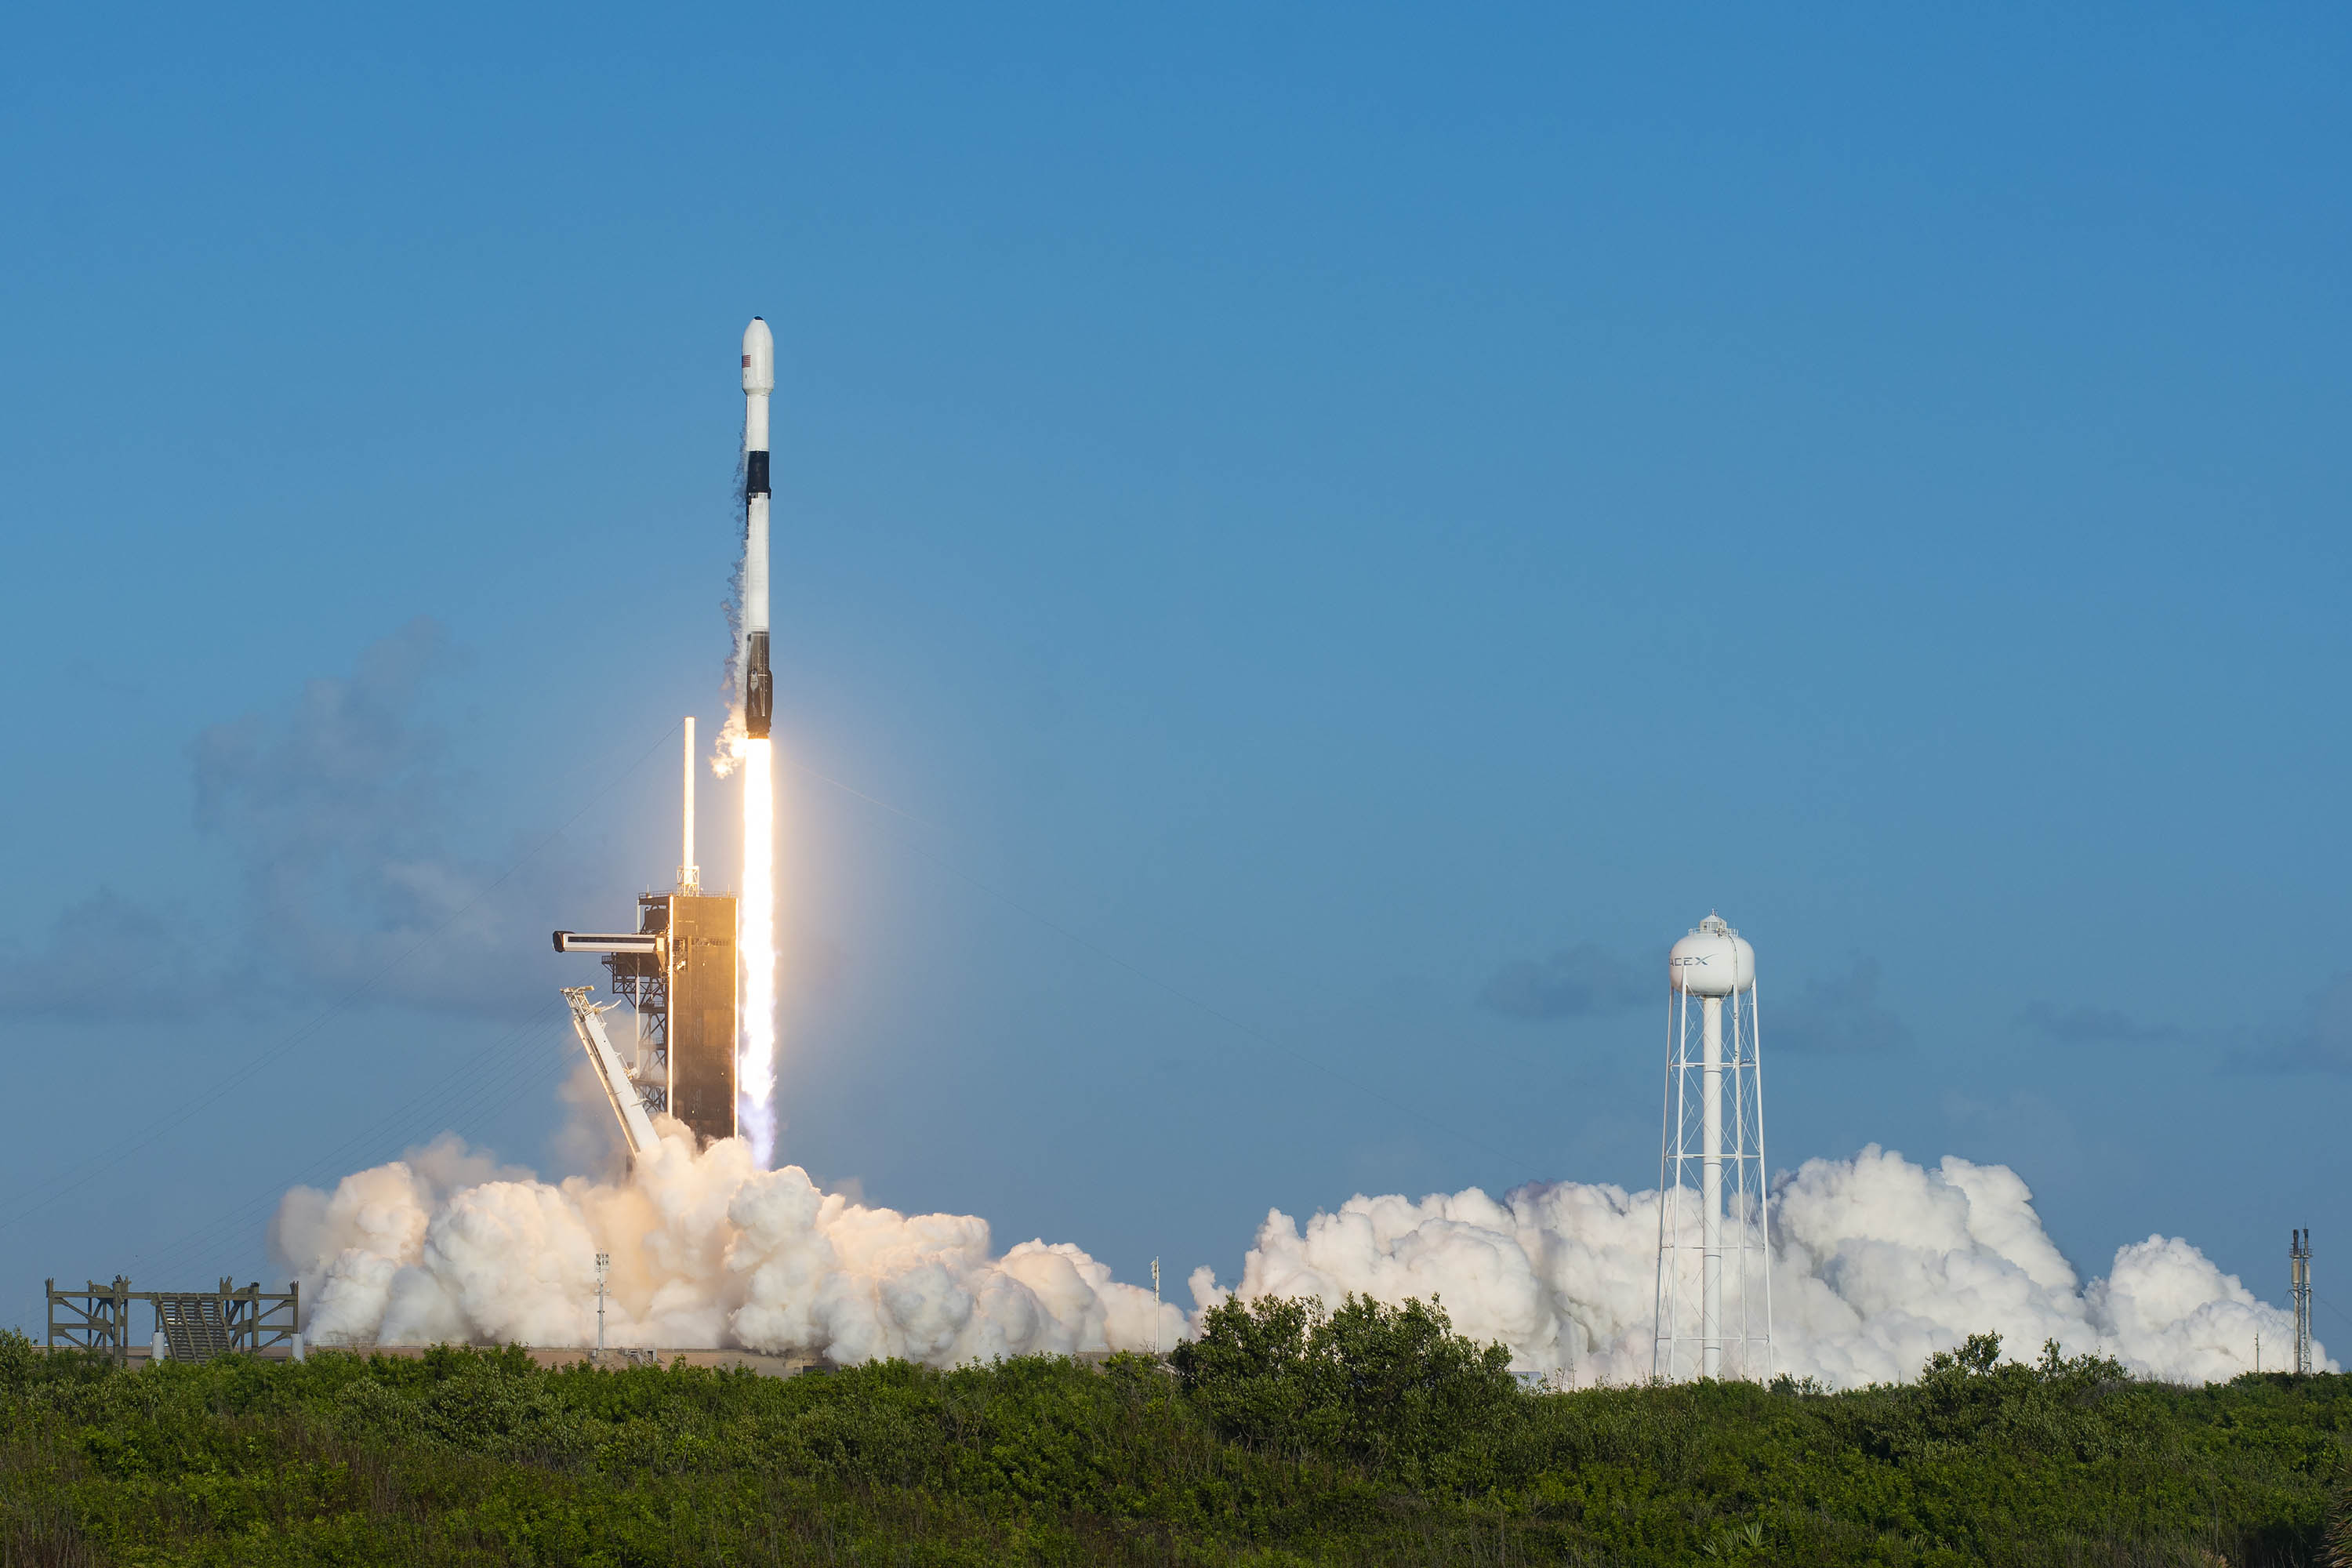 SpaceX is one step closer to providing internet as it launches fourteenth fleet of Starlink satellites